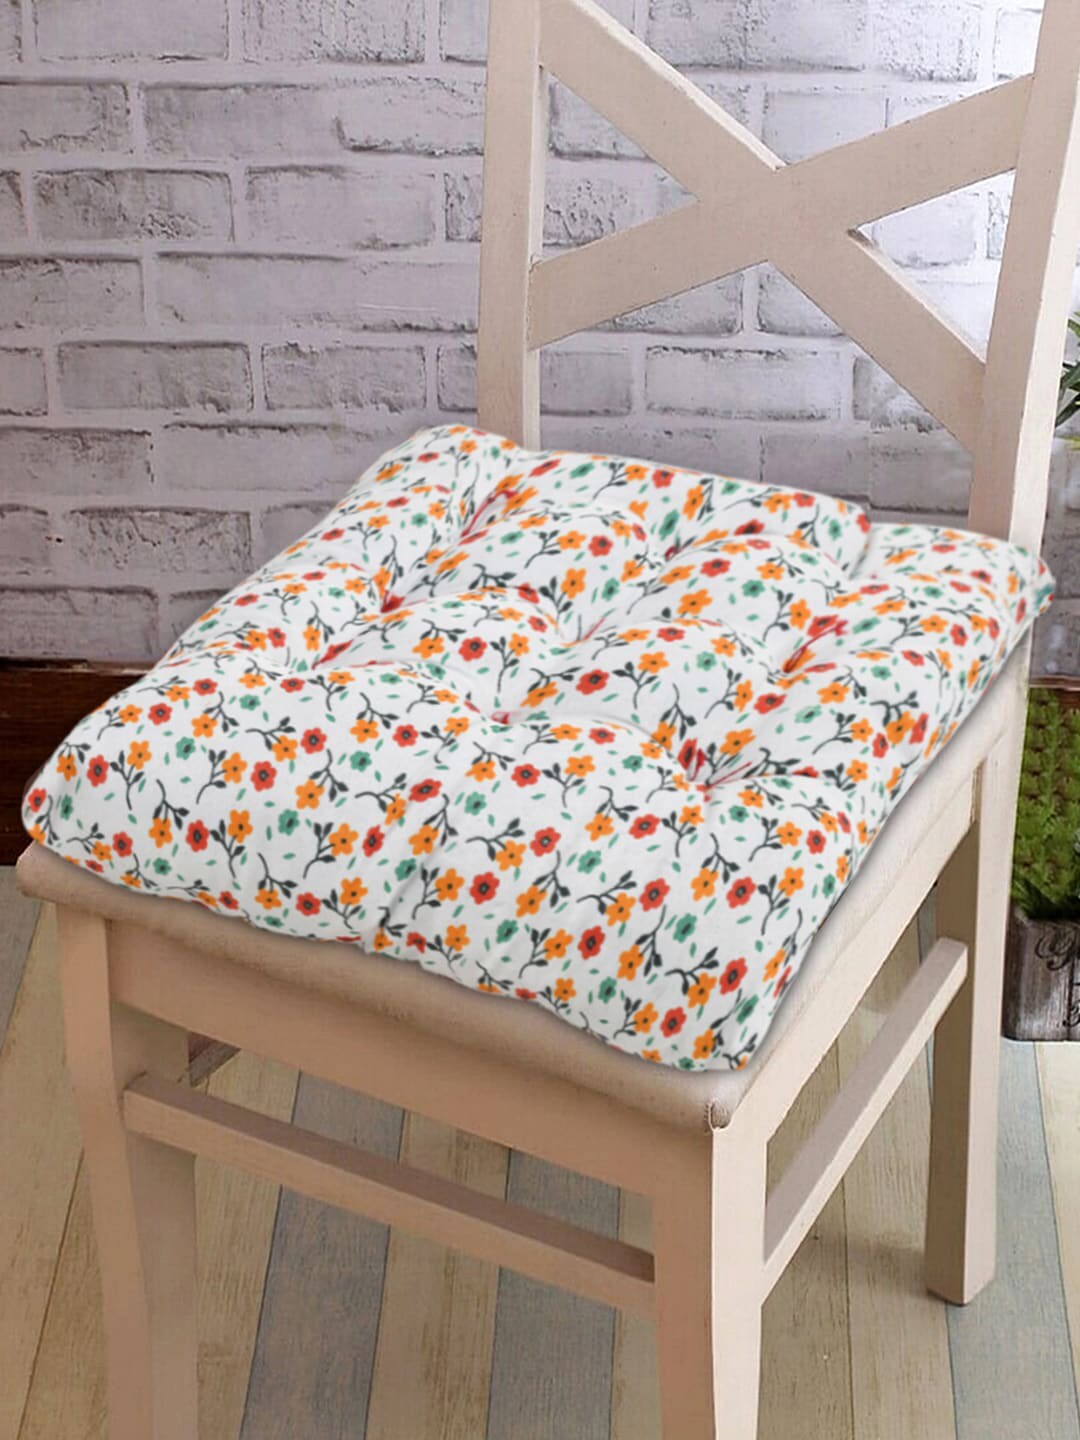 Kuber Industries Set of 3 White Floral Printed Microfiber Square Chair Pad With Ties Price in India